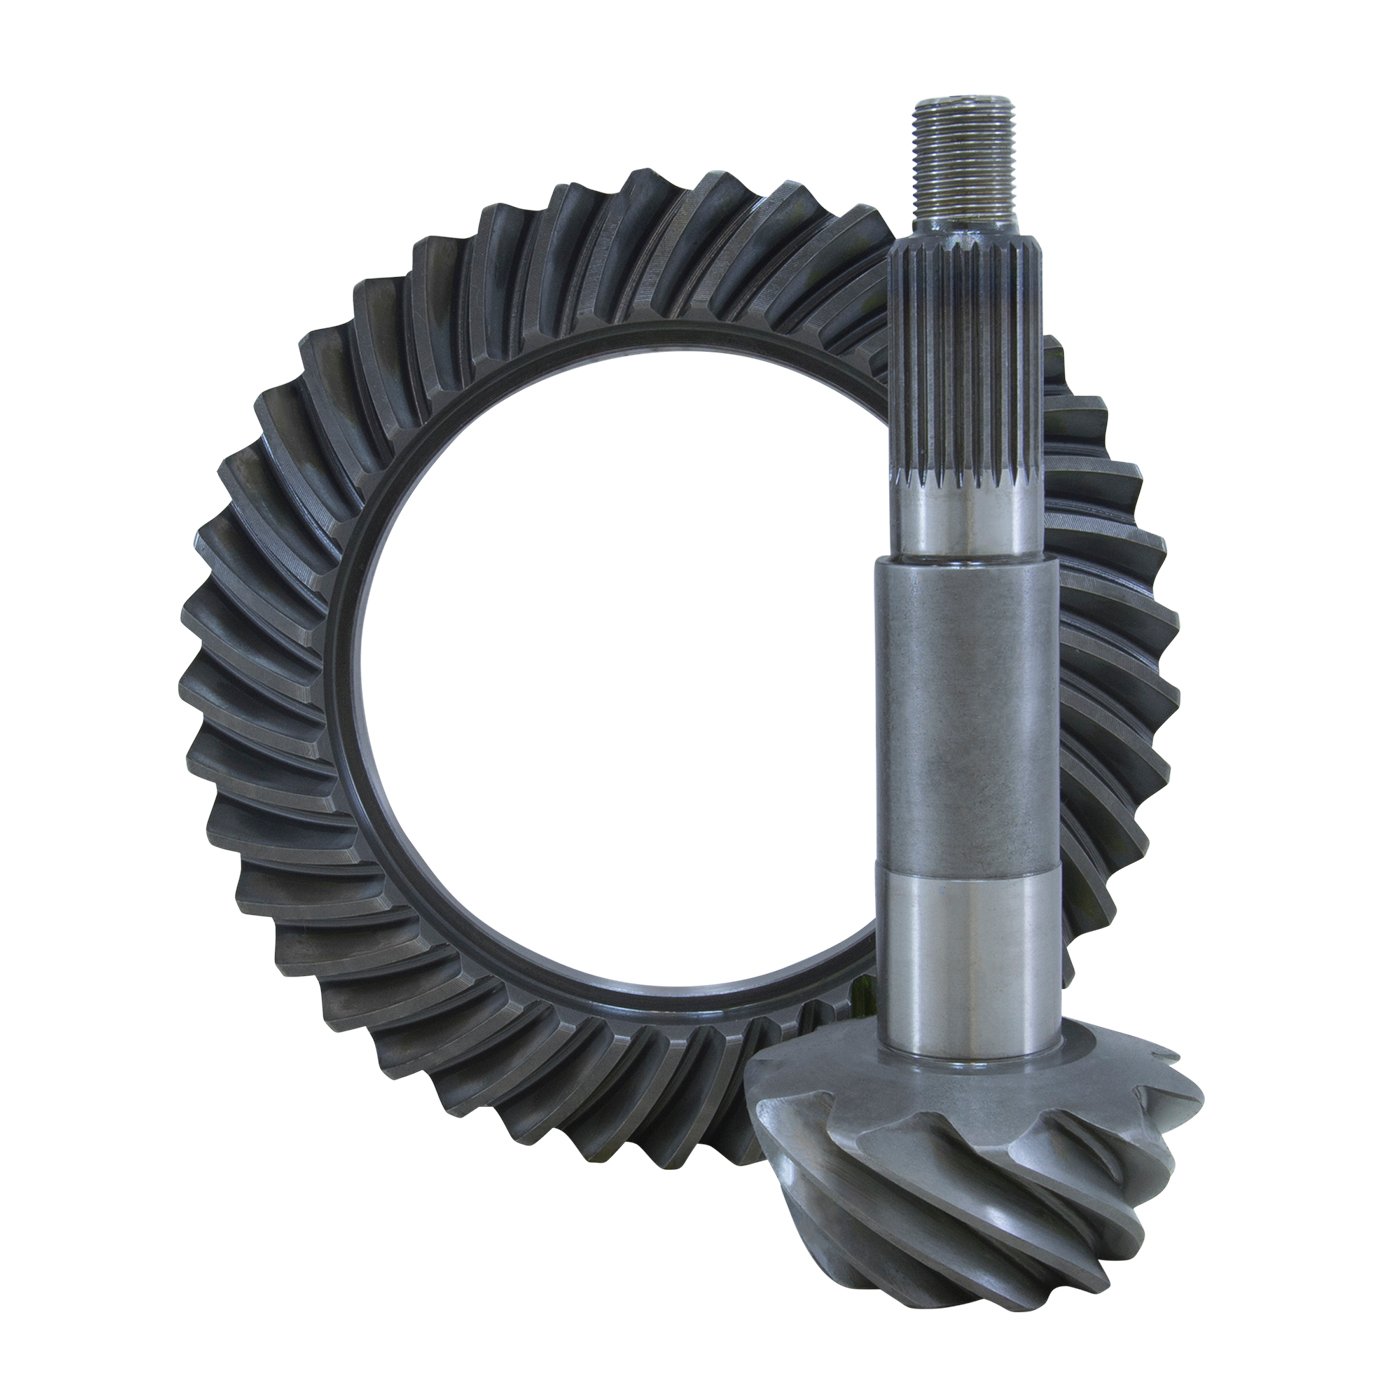 USA Standard ZG D44-589 Replacement Ring & Pinion Gear Set, For Dana 44, 5.89 Ratio